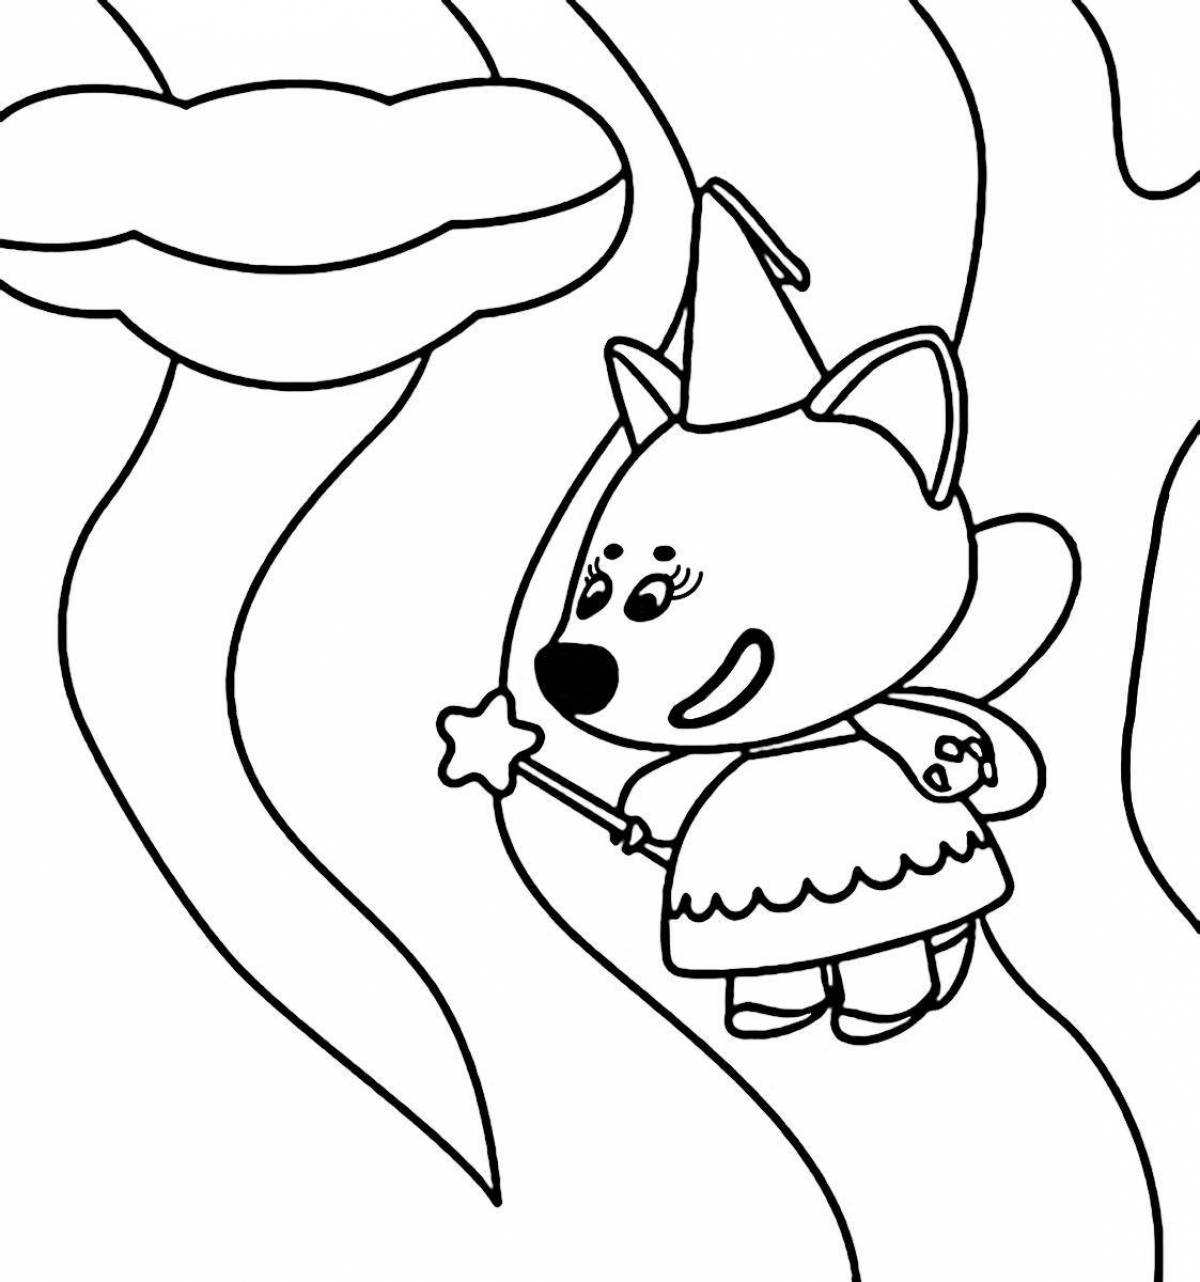 Adorable fox coloring book for children 2-3 years old